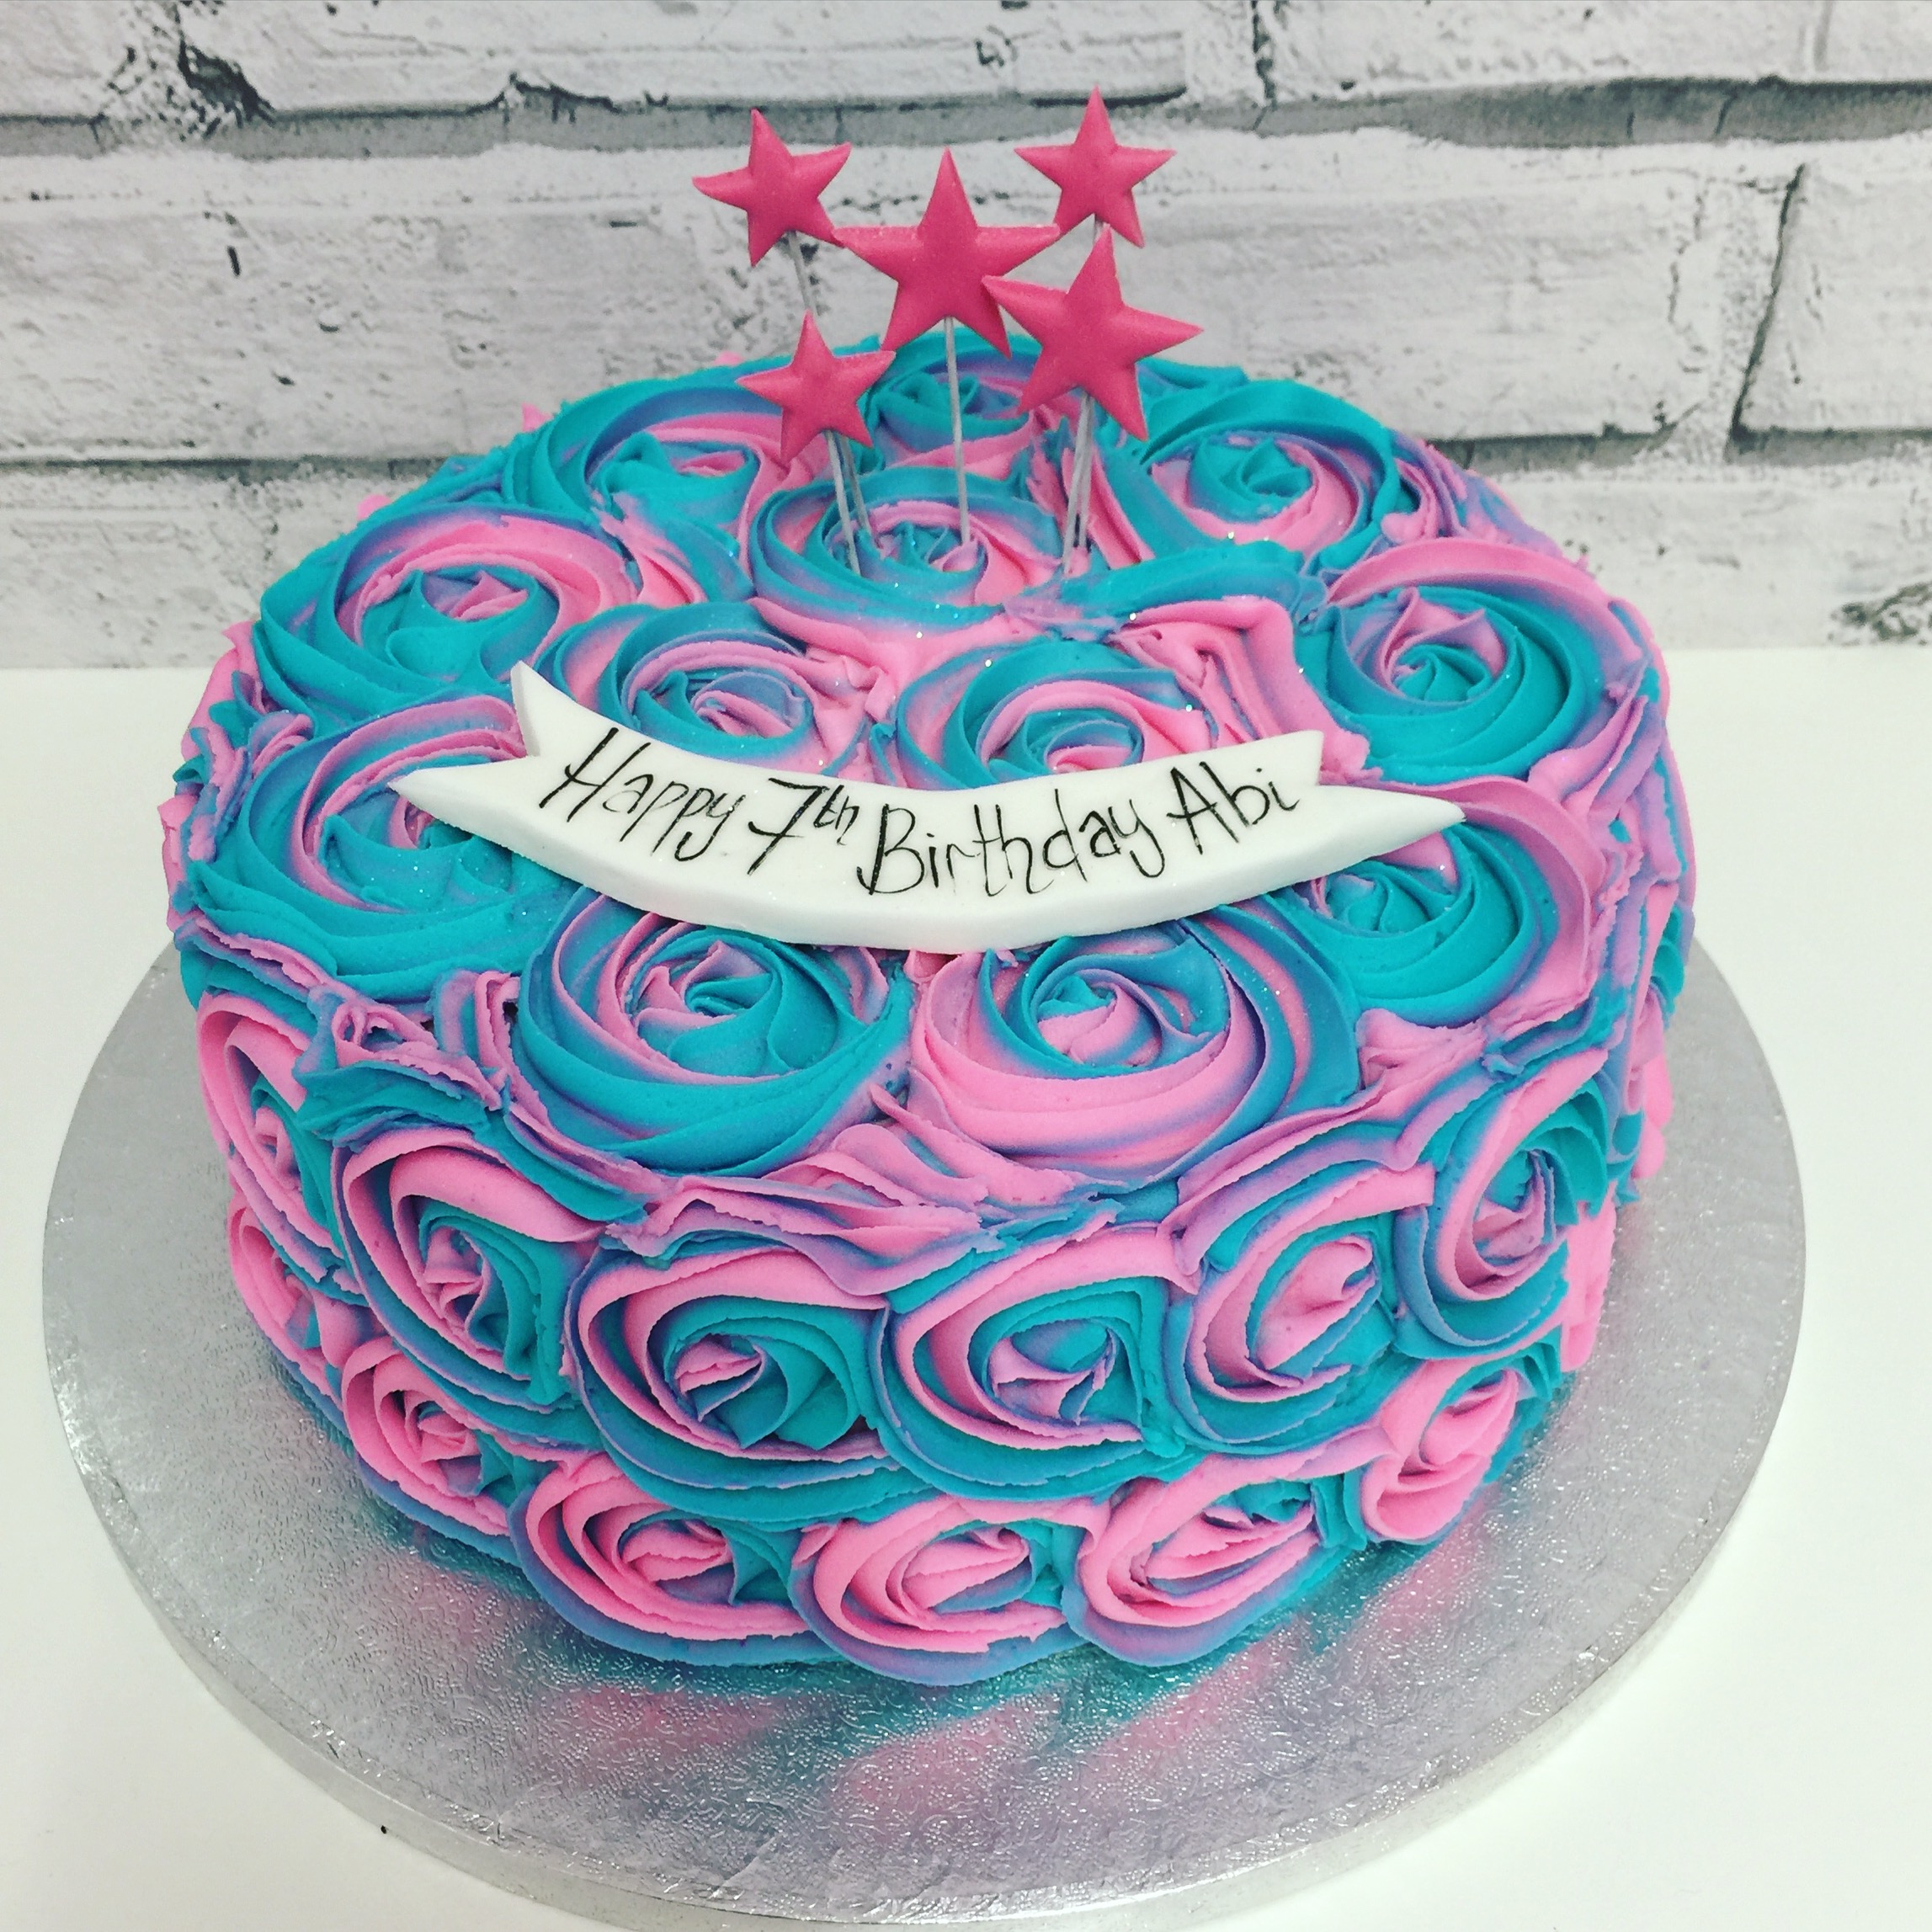 Hot Pink and Turquoise Birthday Cake